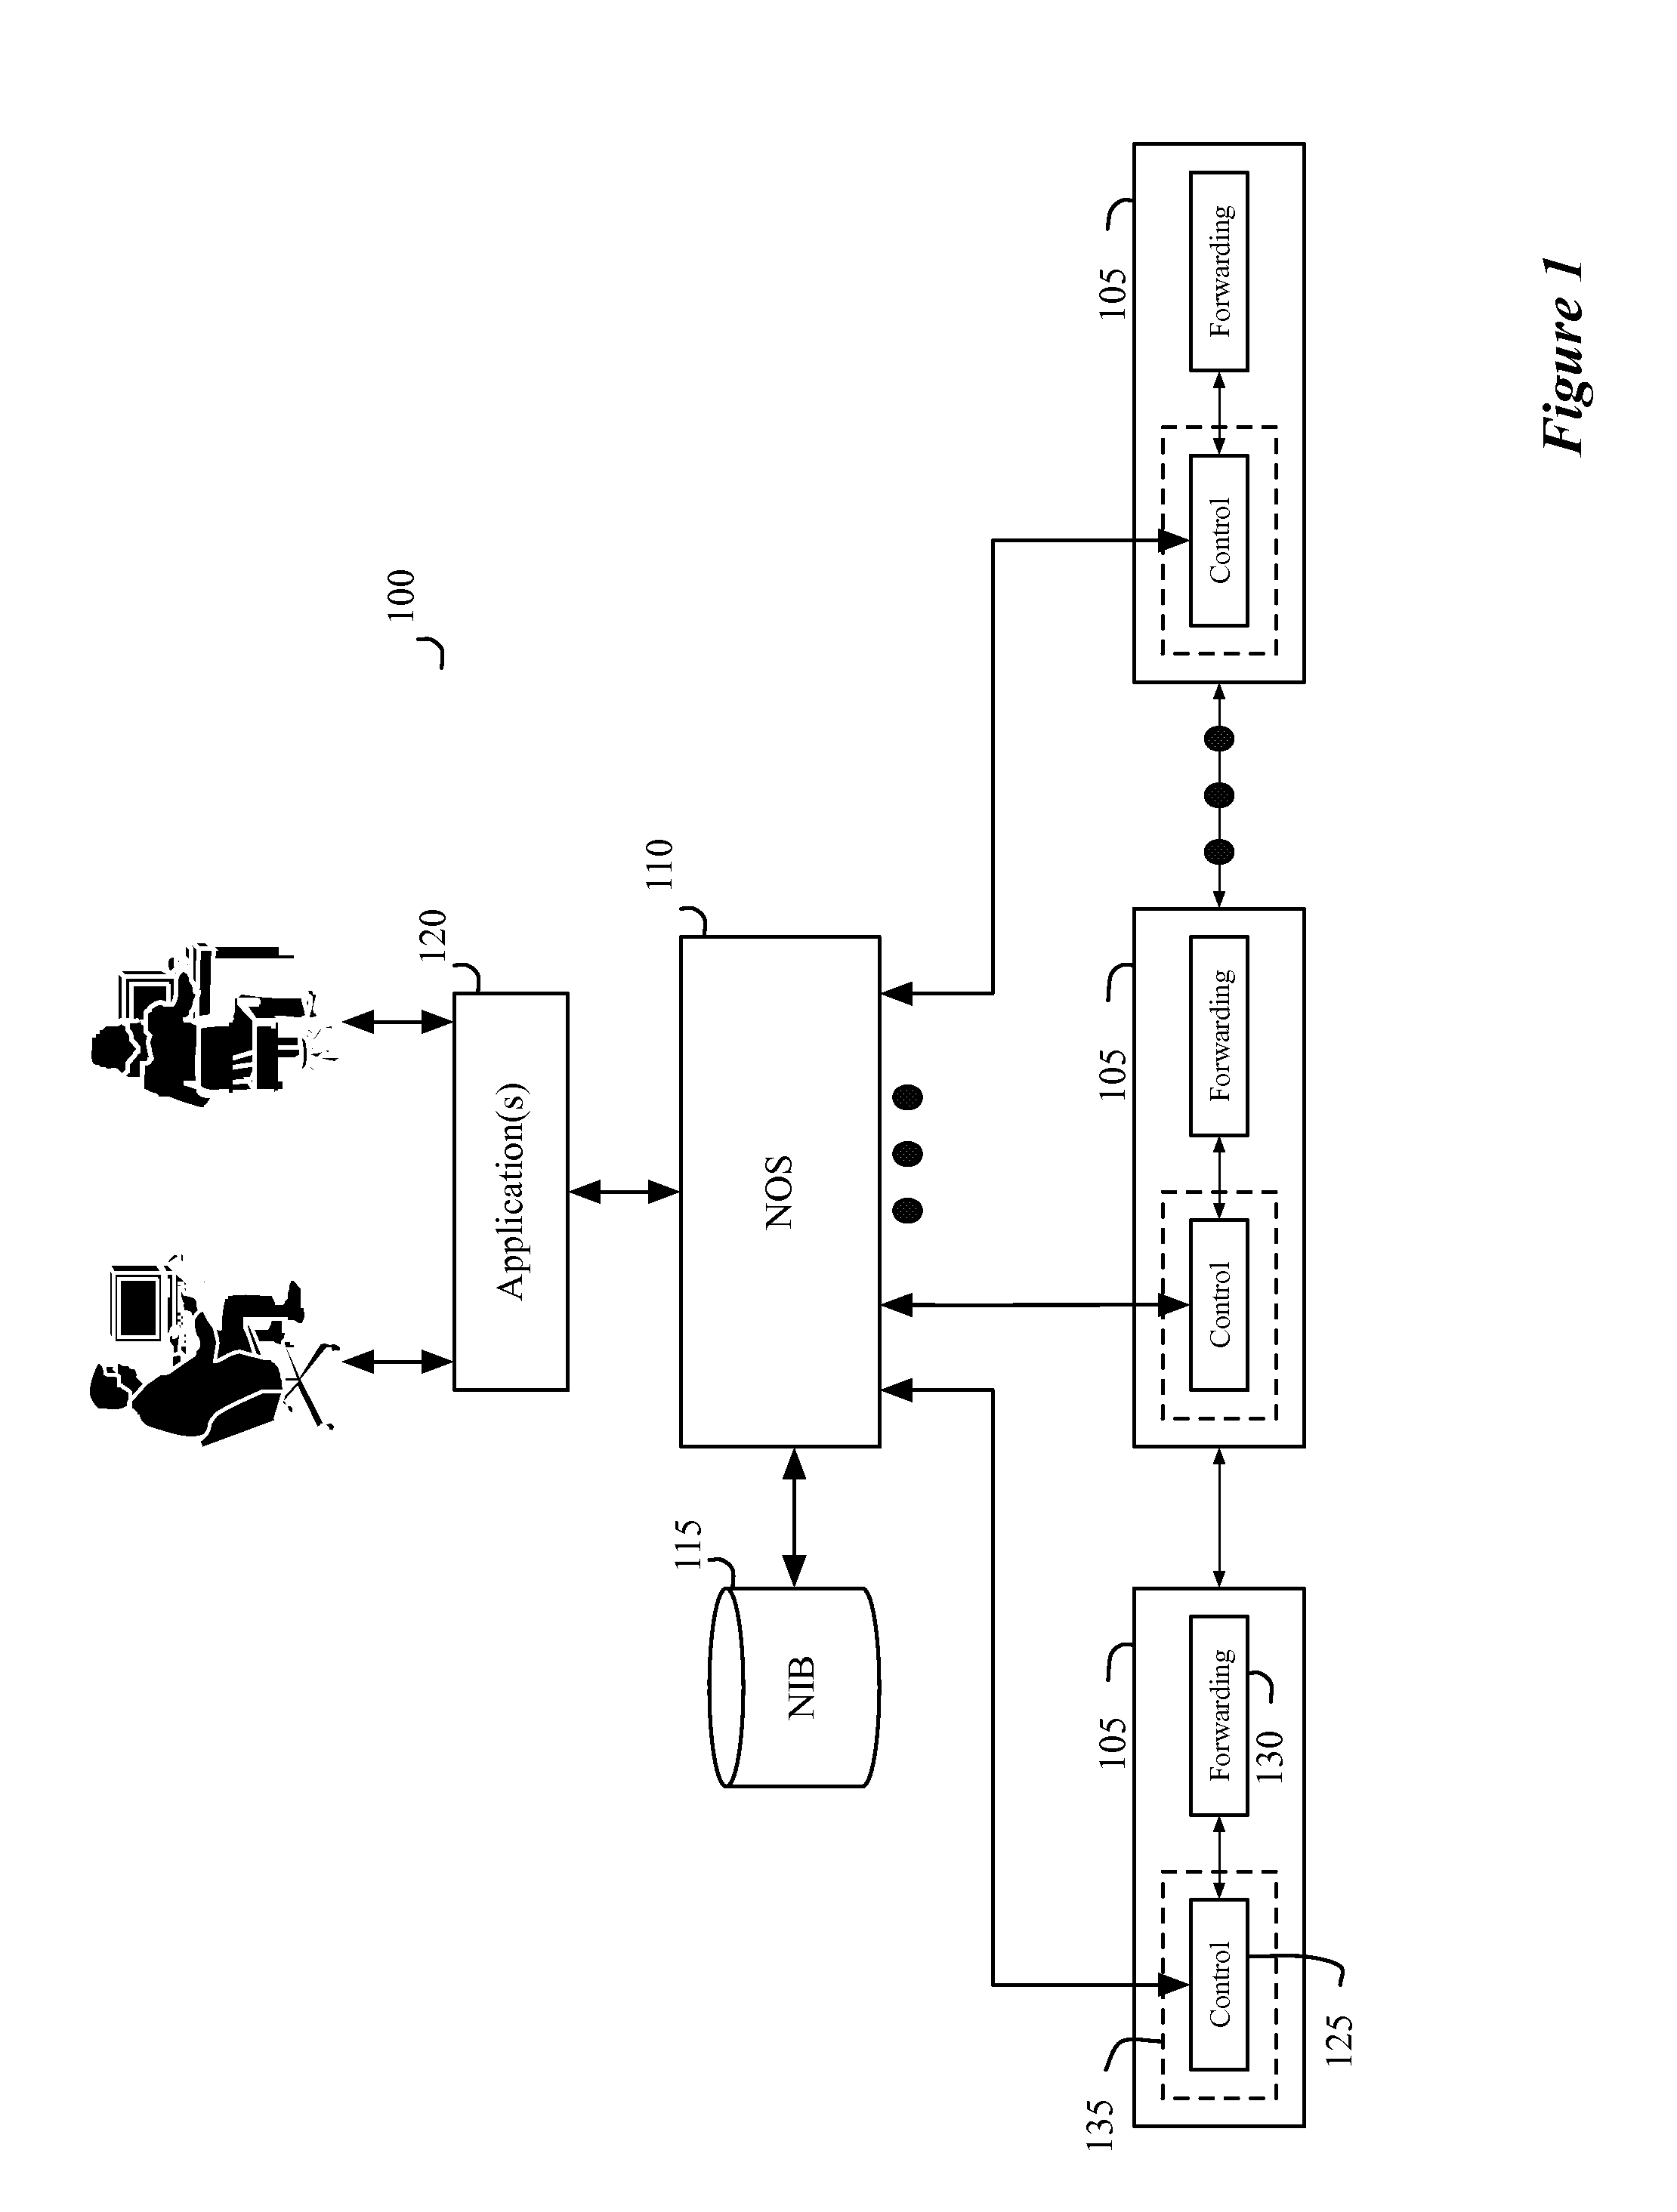 Method and apparatus for using a network information base to control a plurality of shared network infrastructure switching elements